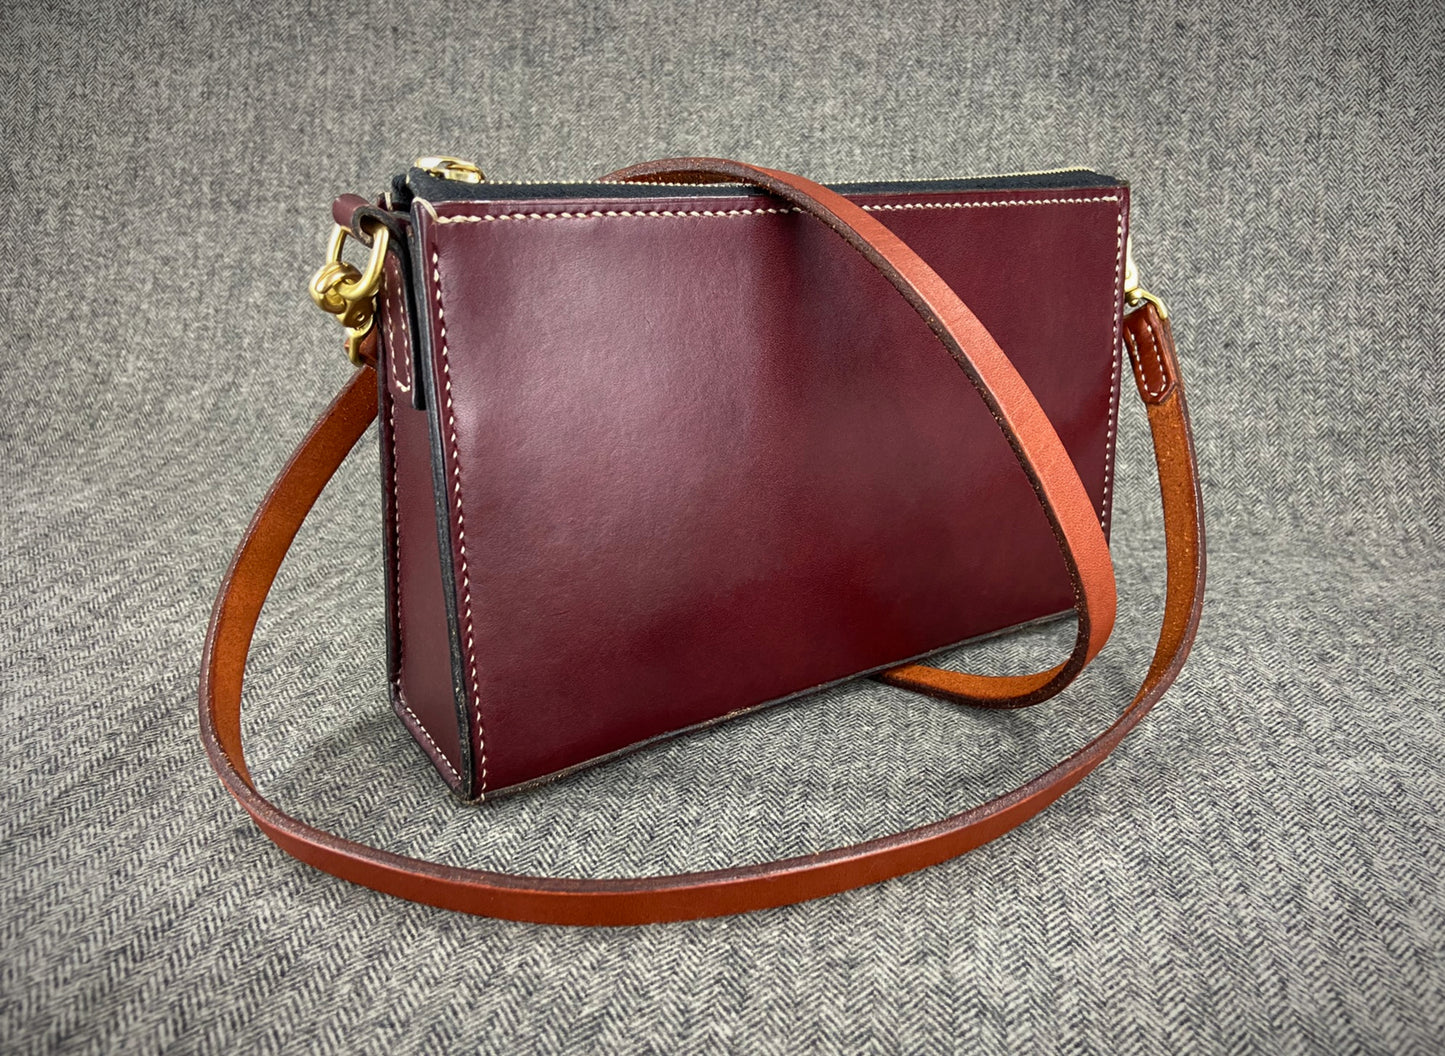 Handcrafted full grain vegetable tanned leather crossbody purse strap made in New Hampshire, USA. Fully hand stitched, solid brass hardware, hand burnished edges.